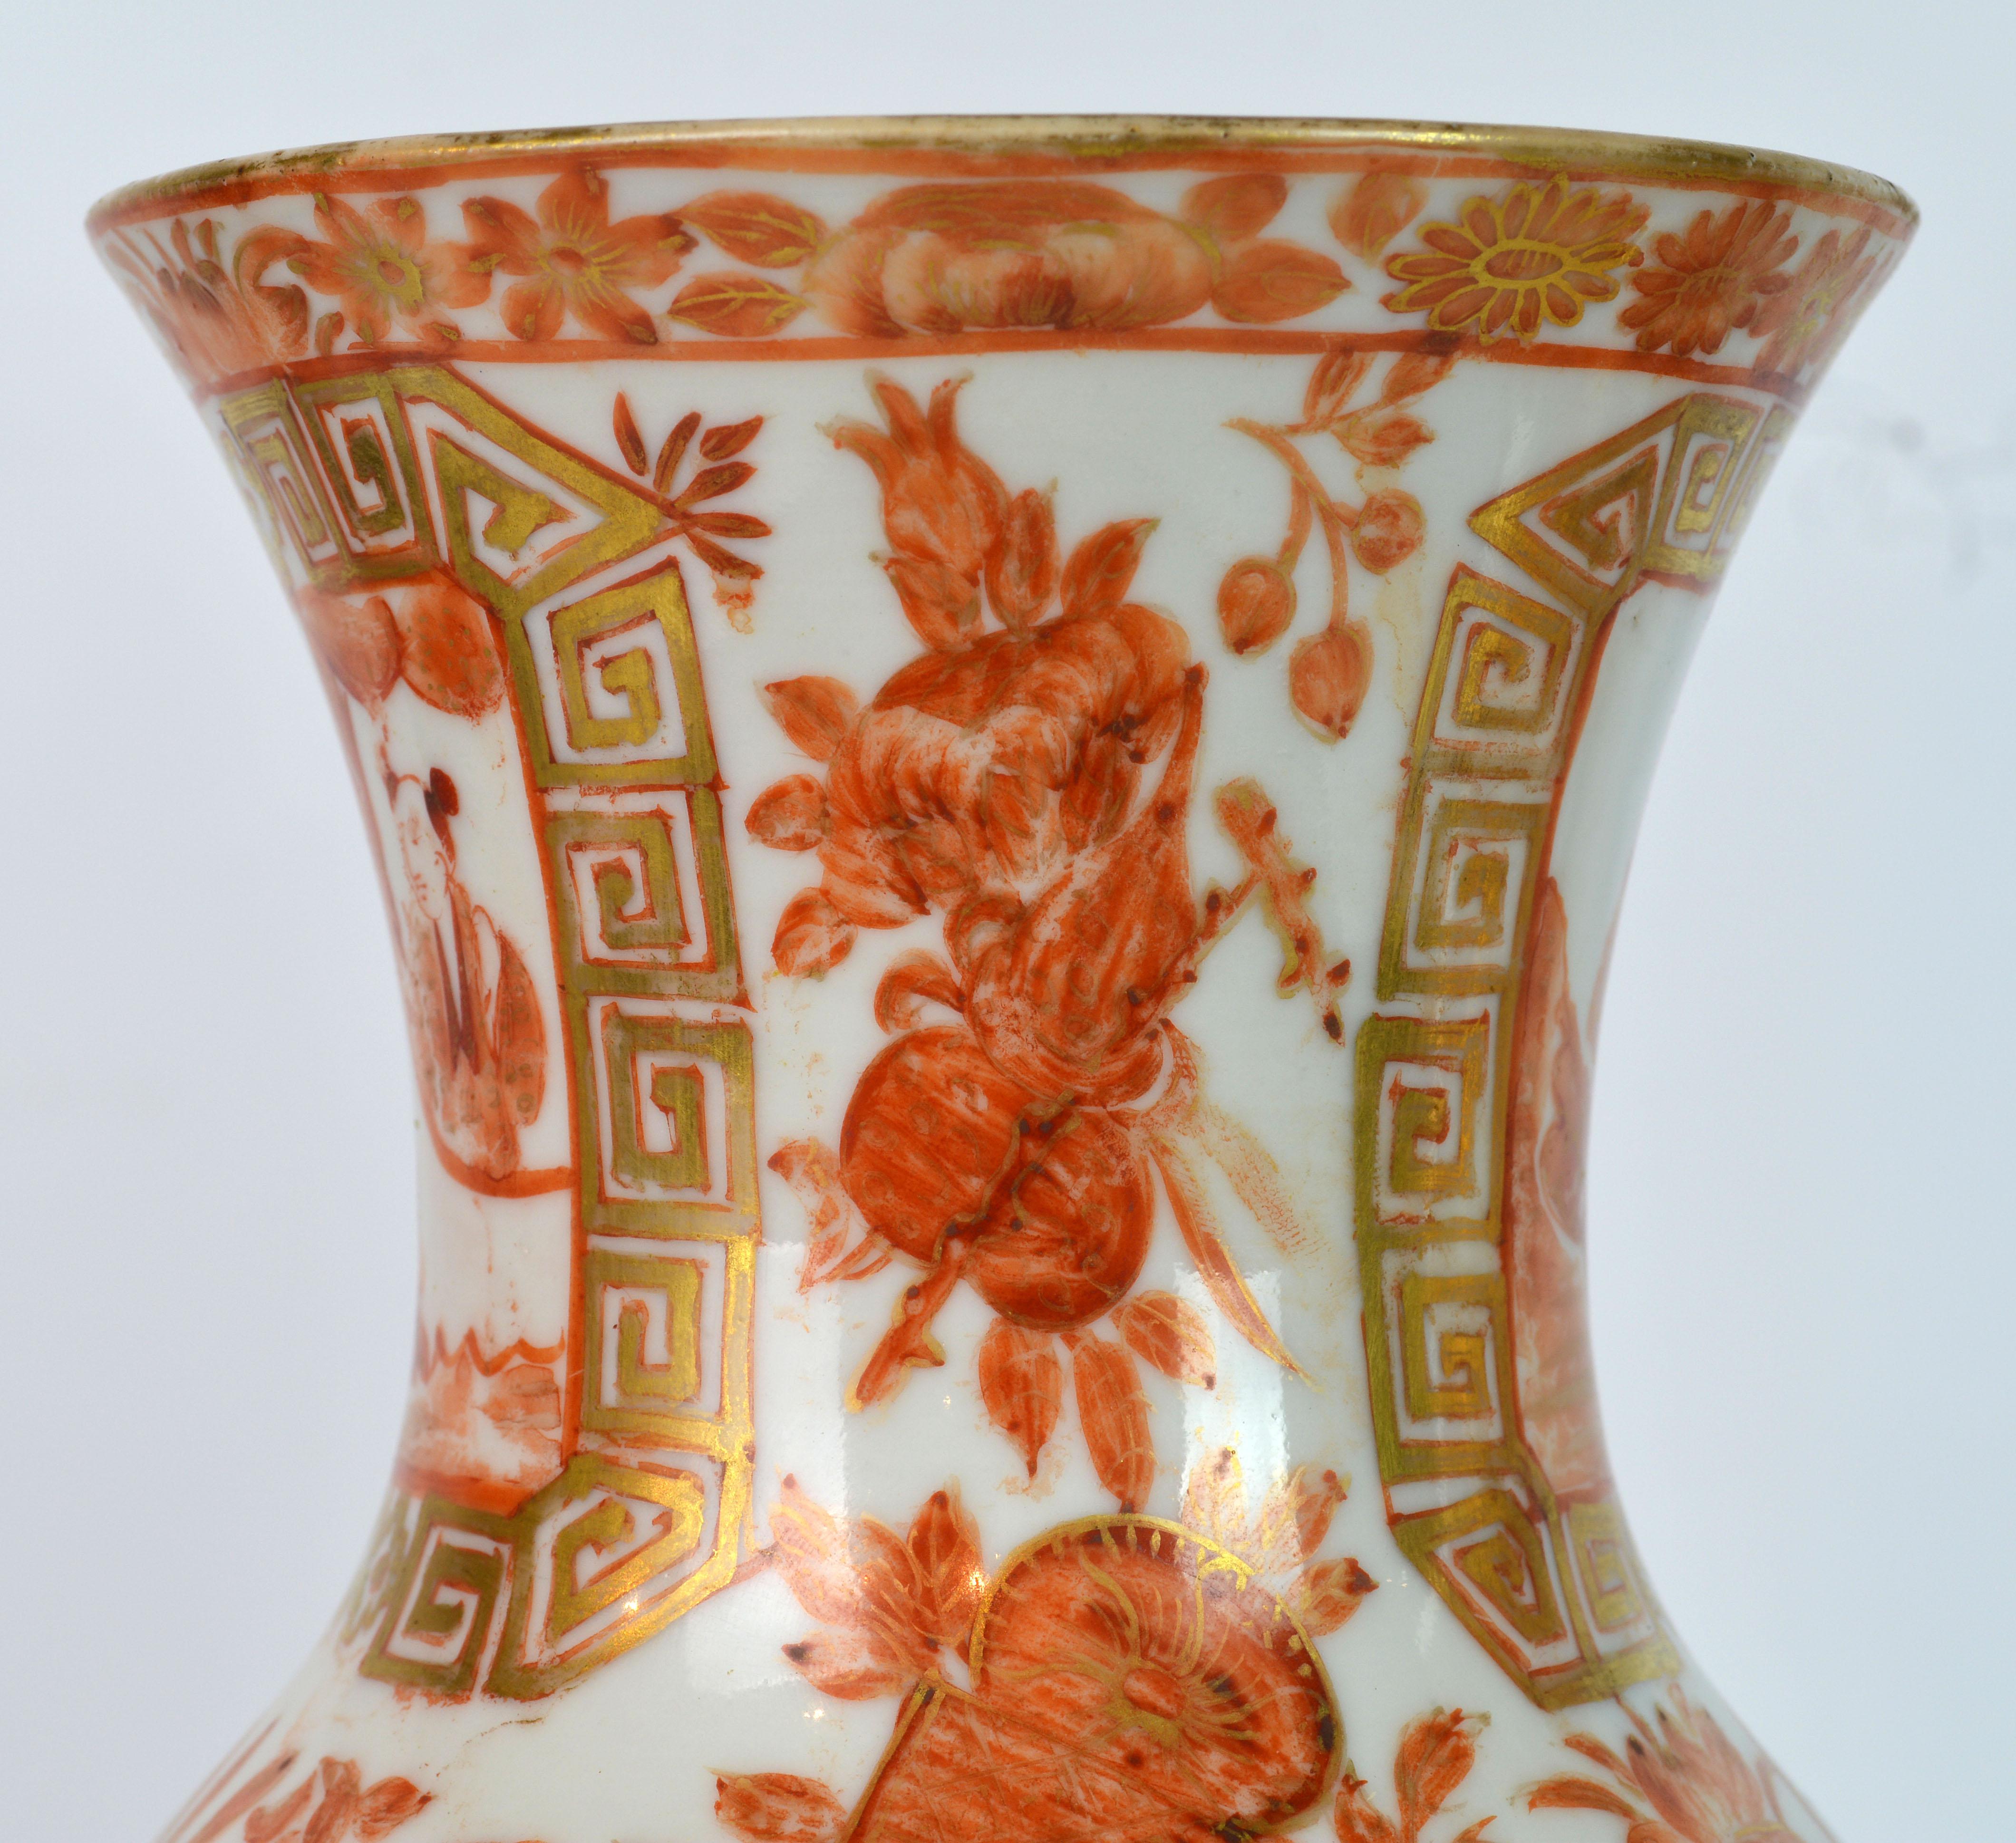 Rare 19th Century Orange and Gilt Decorated Chinese Export Daoguang Vases, Pair 9